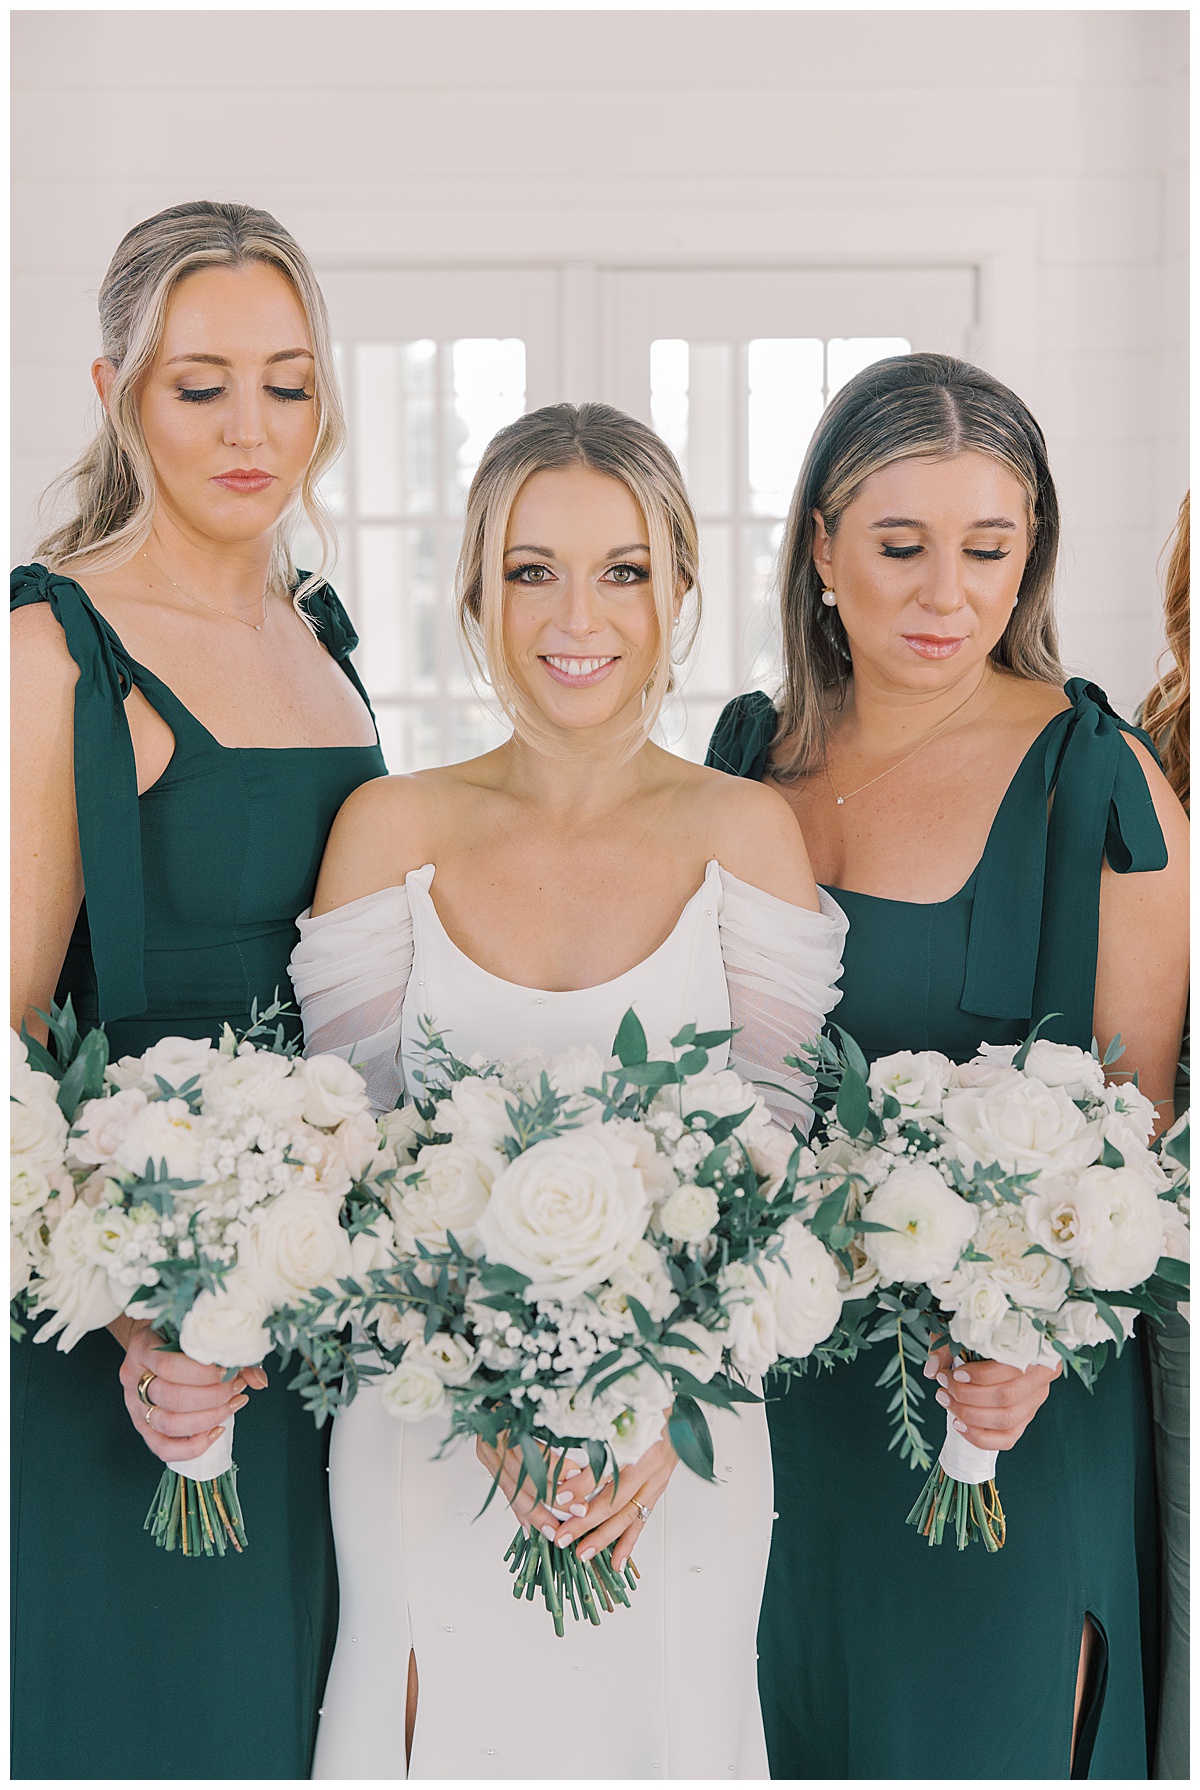 Bride with green bridesmaid dresses and white and green bouquets. 